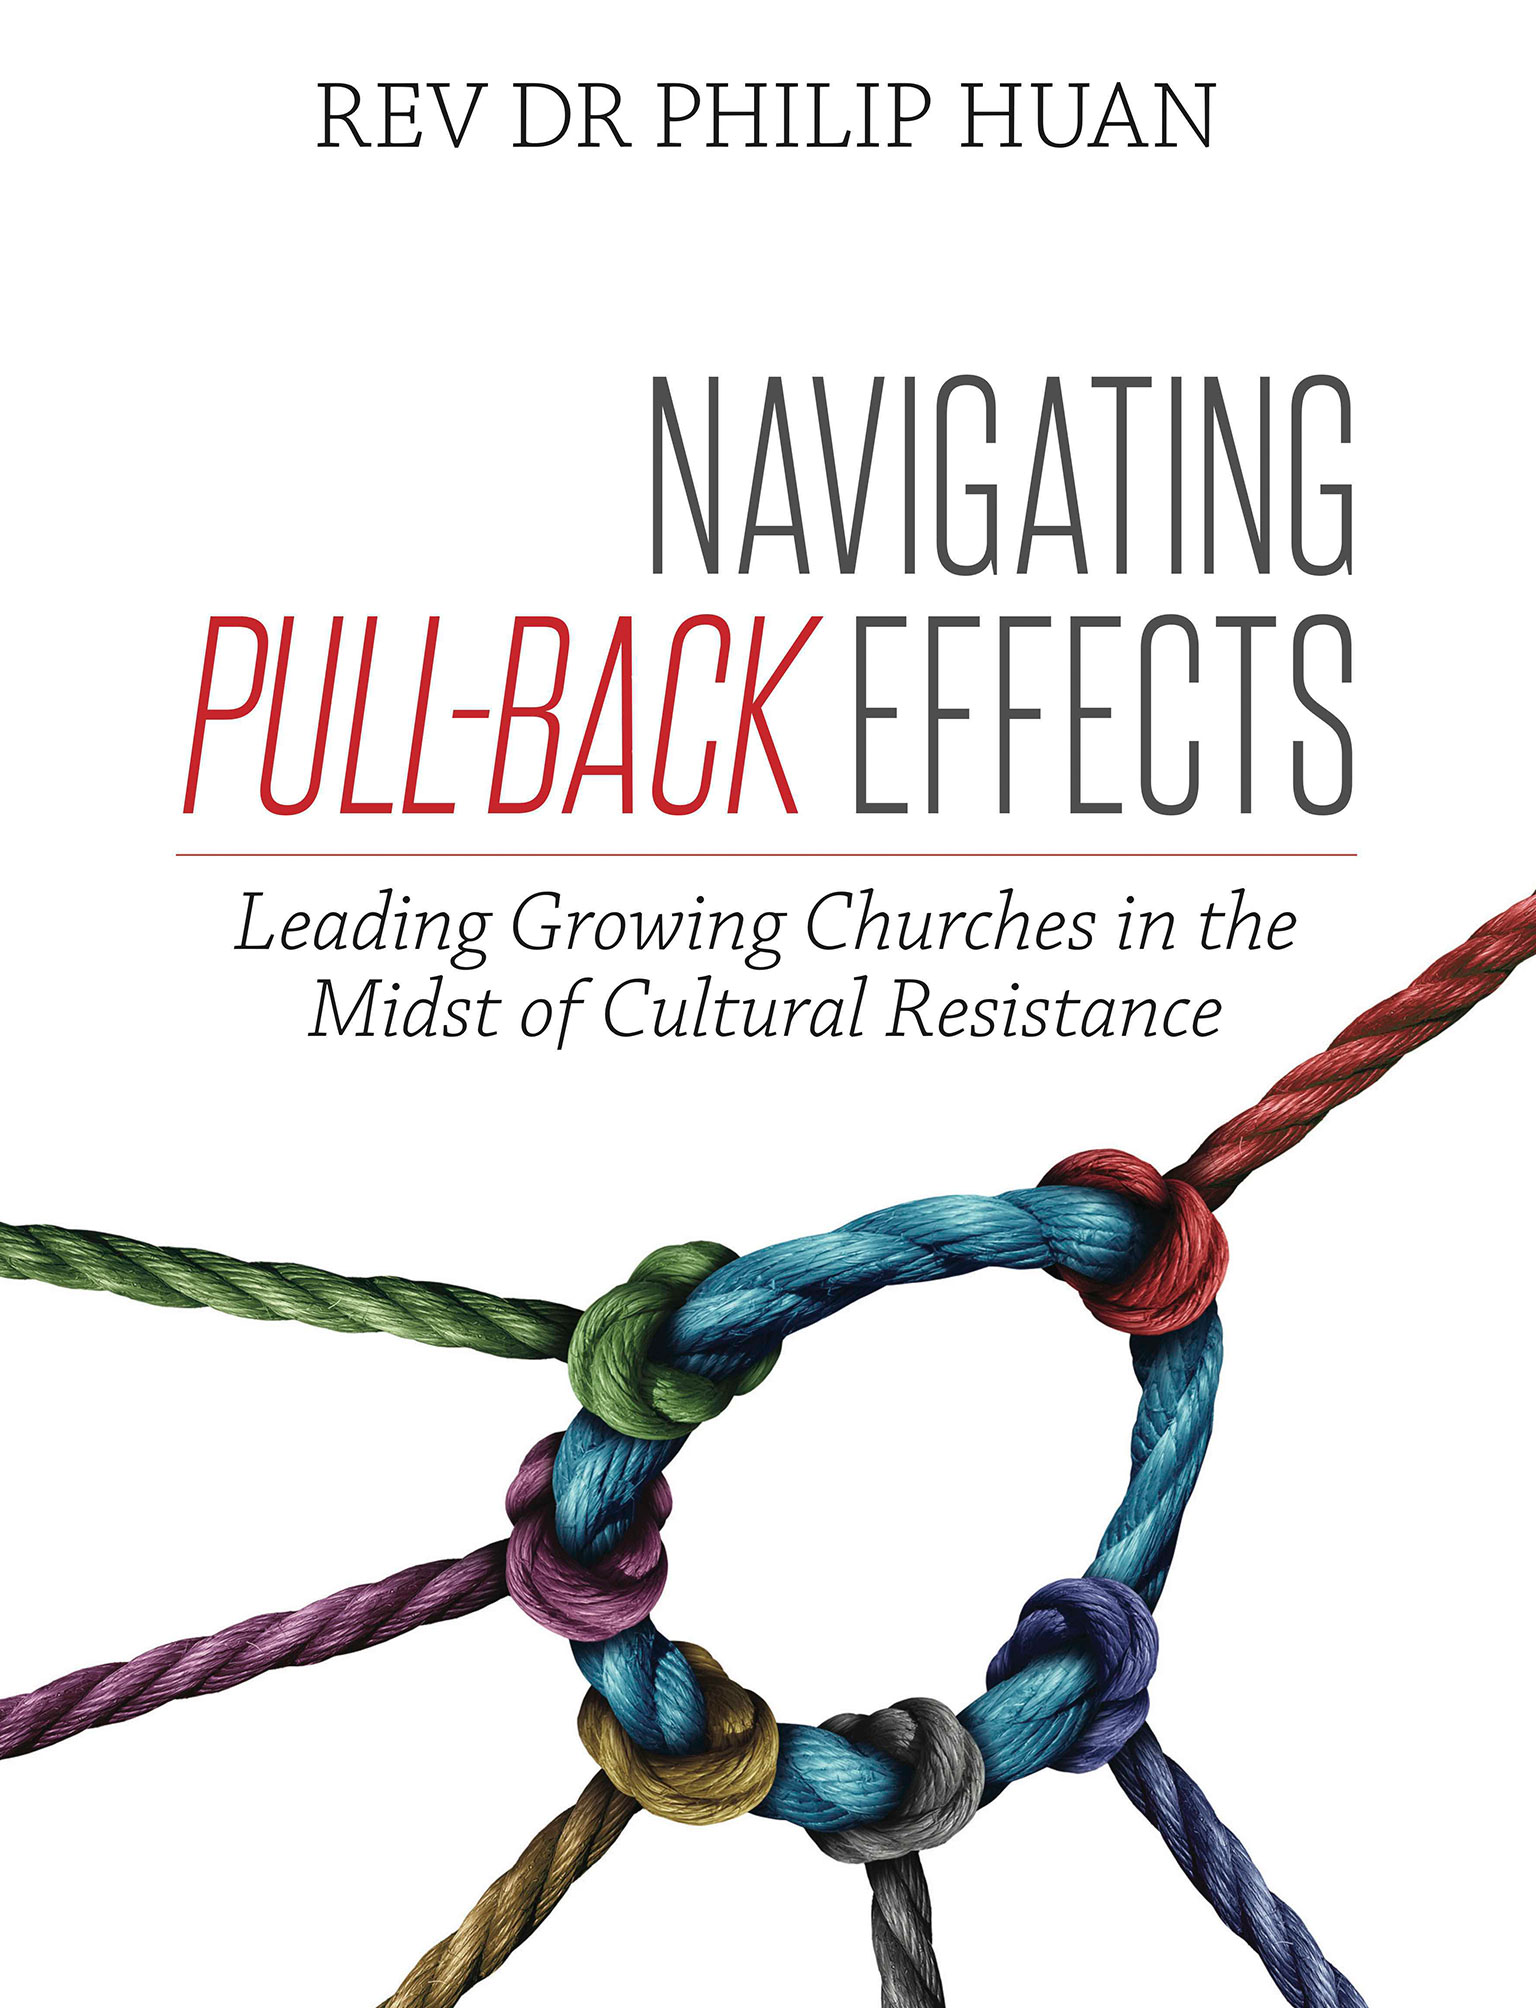 Navigating Pull-Back Effects